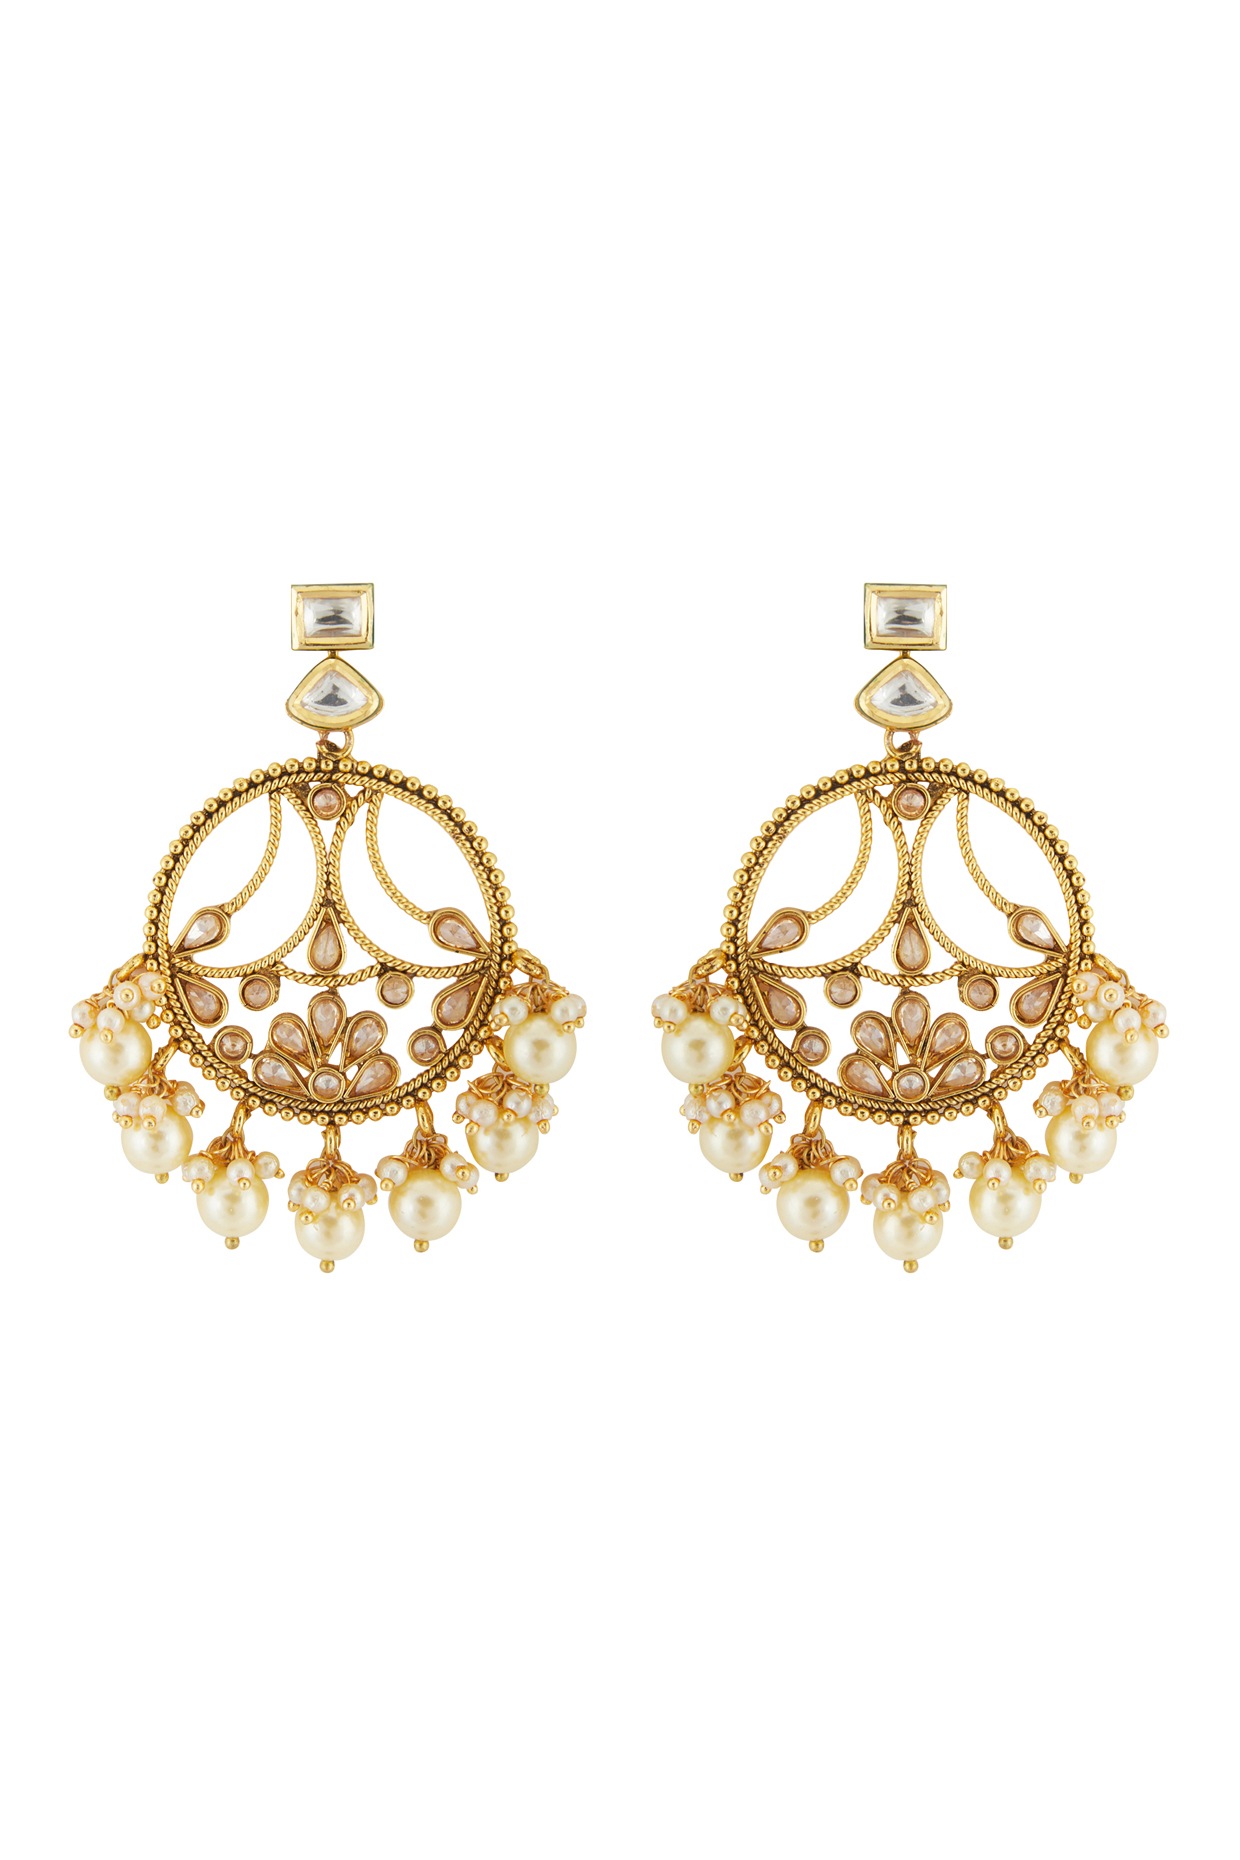 Buy Vighnaharta Traditional wear Gold Plated alloy Jhumka Bali Earring for  Women and Girls ( Pack of- 1 Pair jhumka Bali Earring) Online at Best  Prices in India - JioMart.